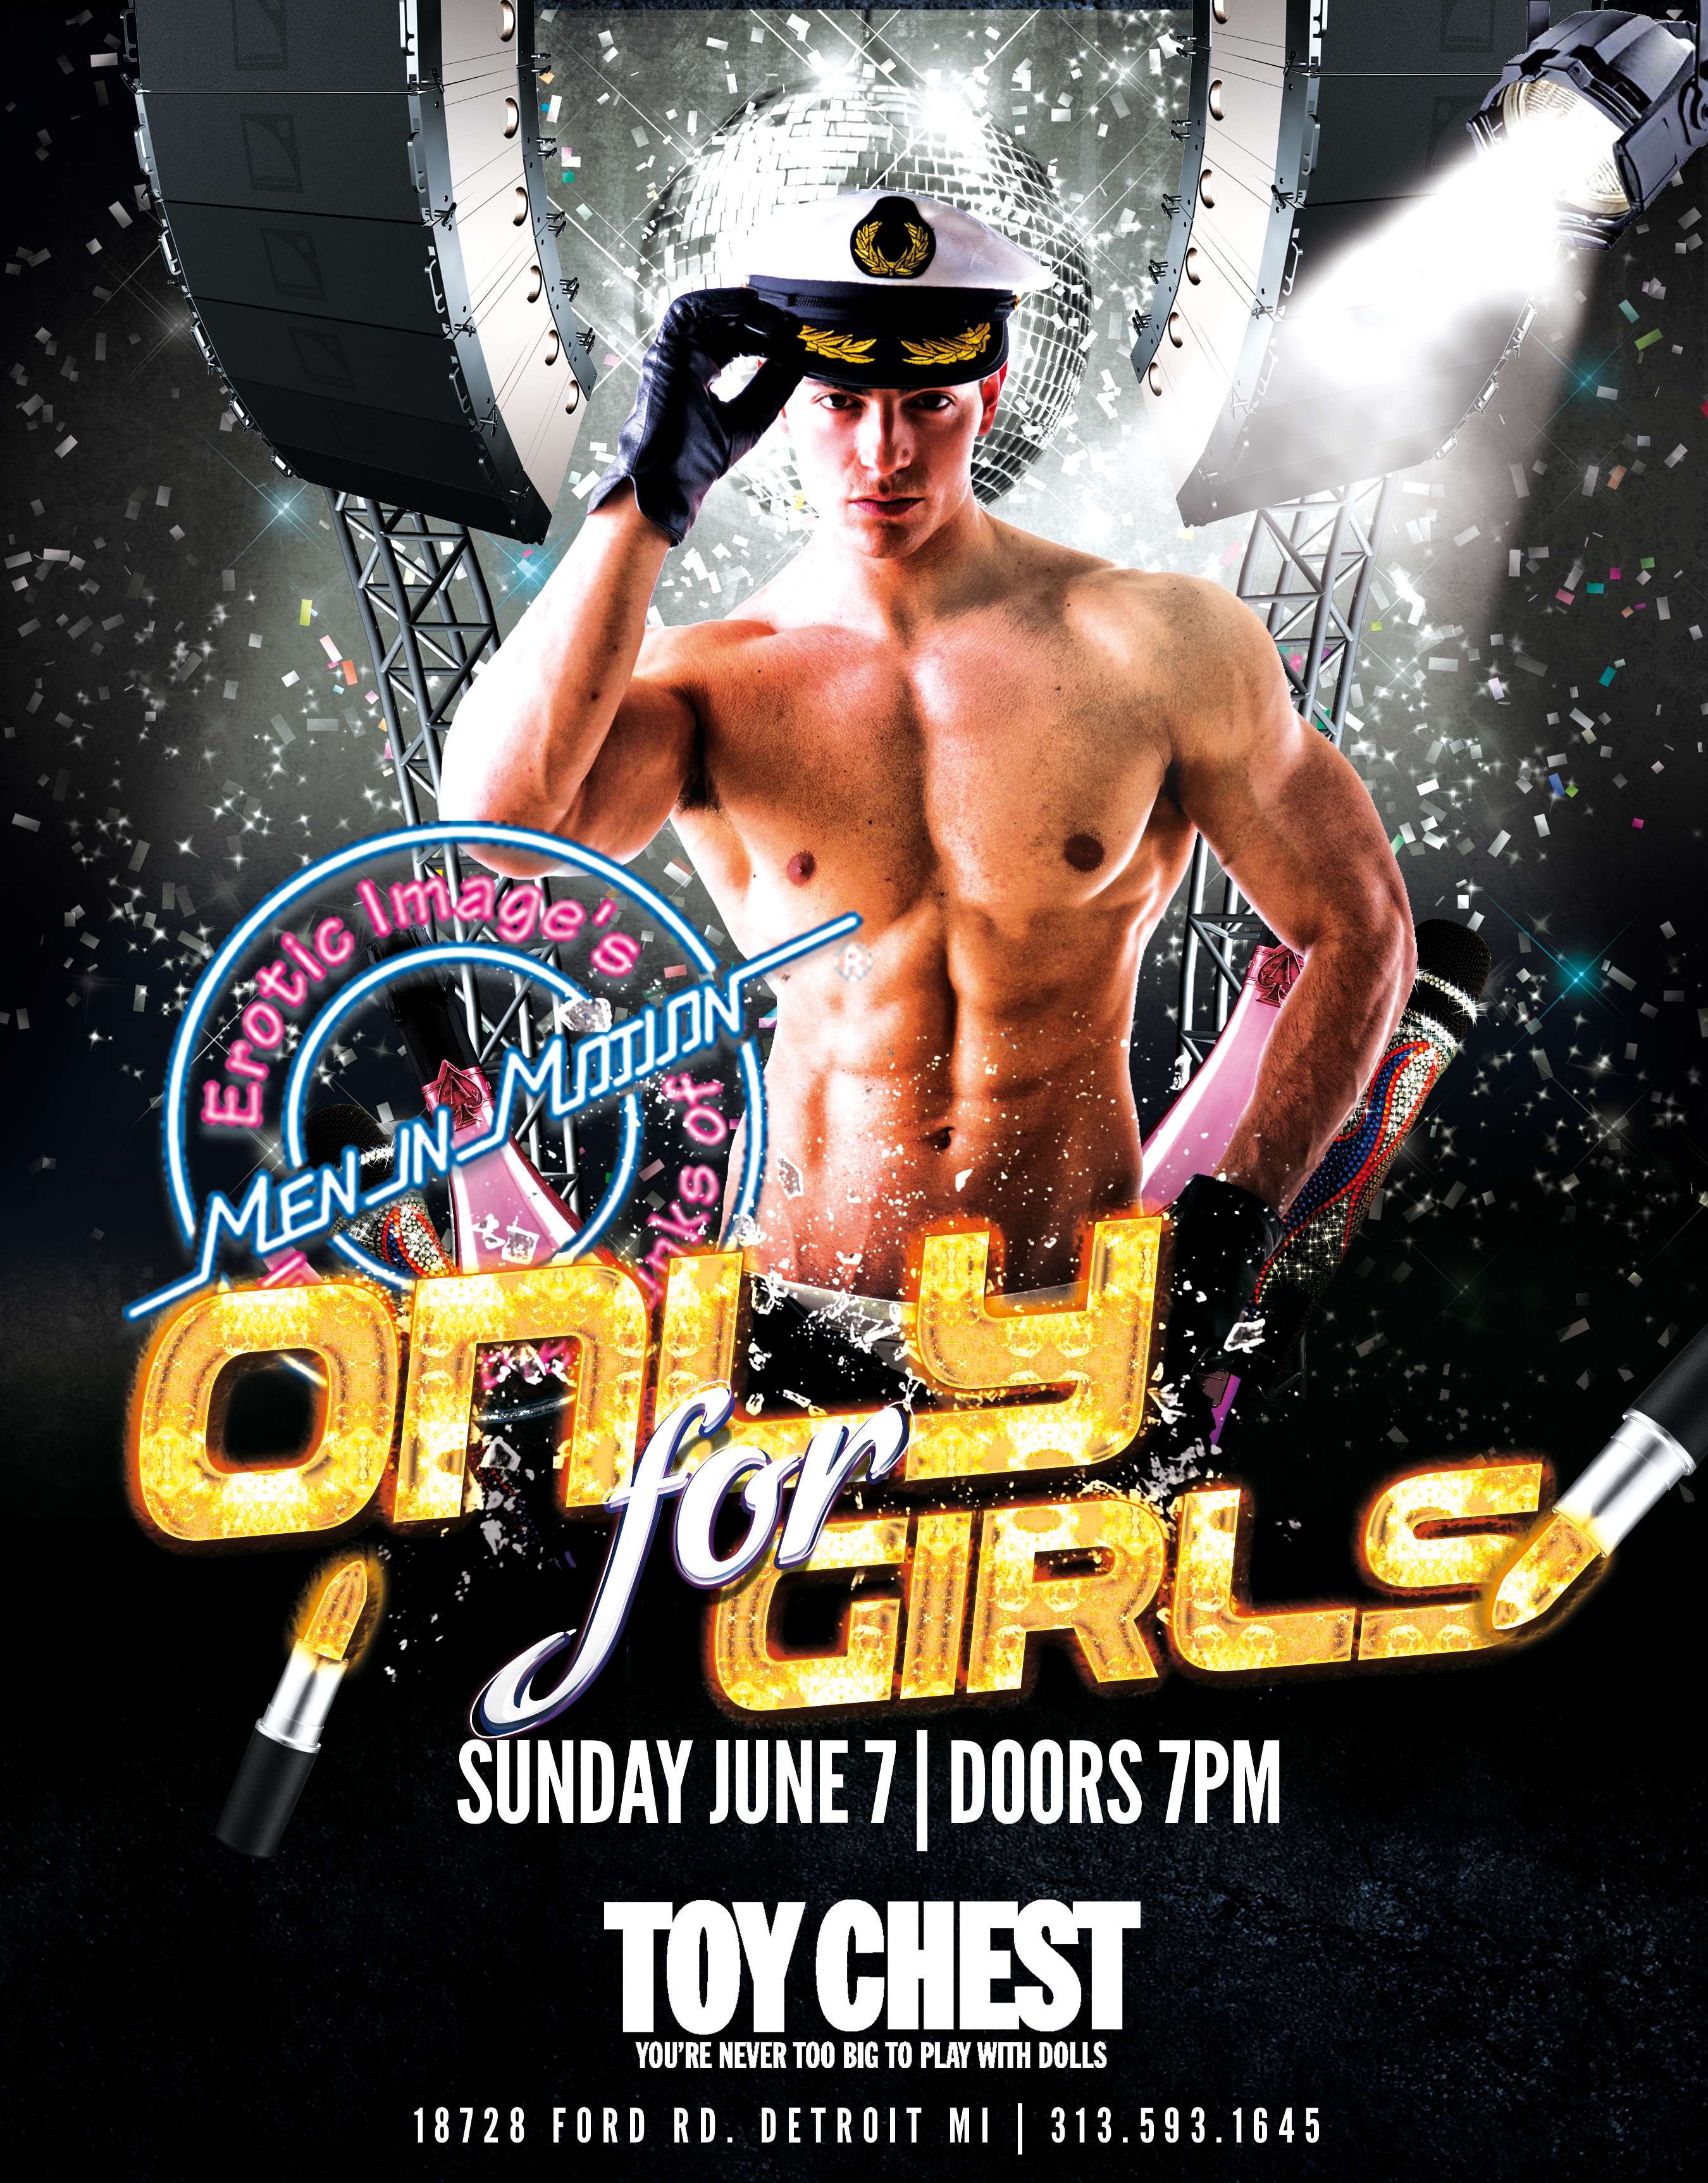 Men In Motion  Only For Girls Tickets 060715-5691